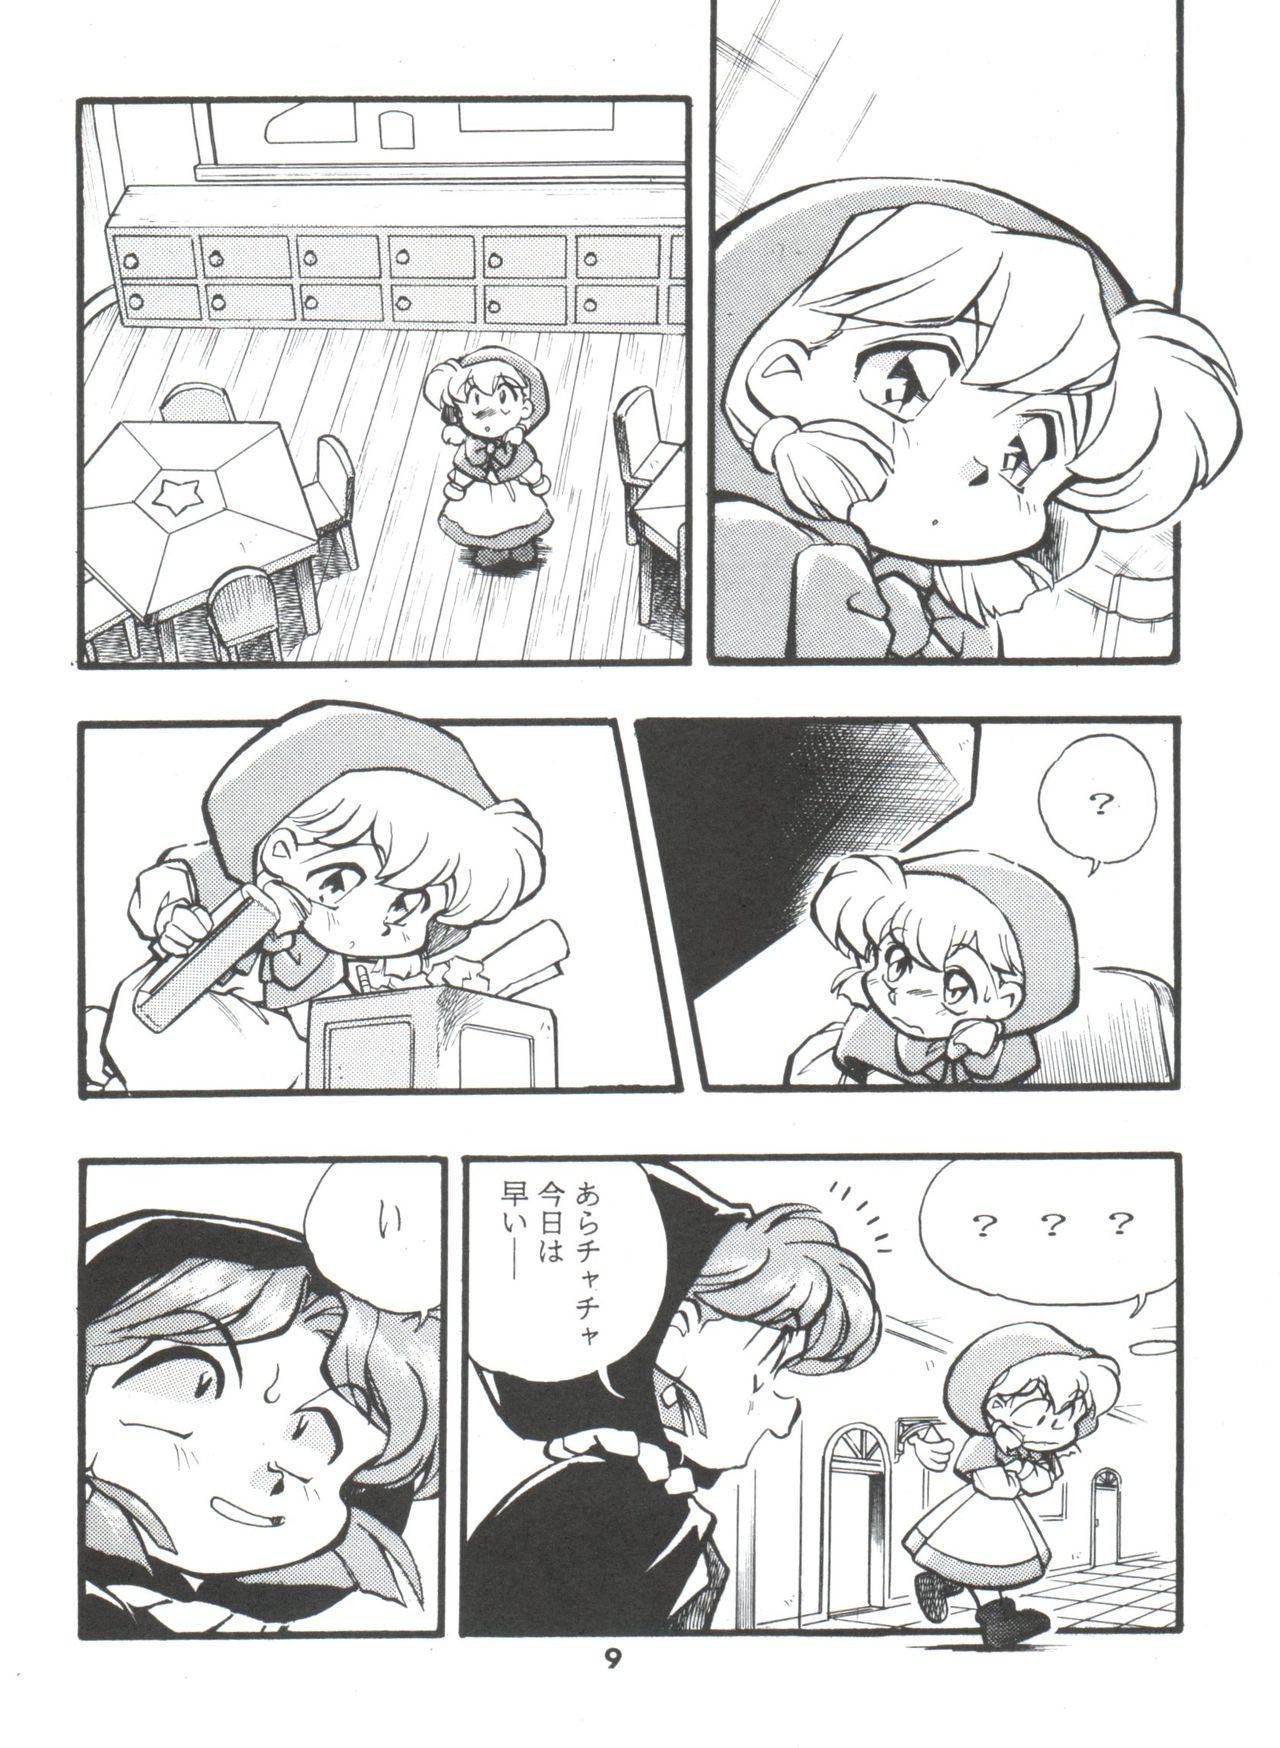 Old Young DK-1 III - Akazukin cha cha Ameteur Porn - Page 9